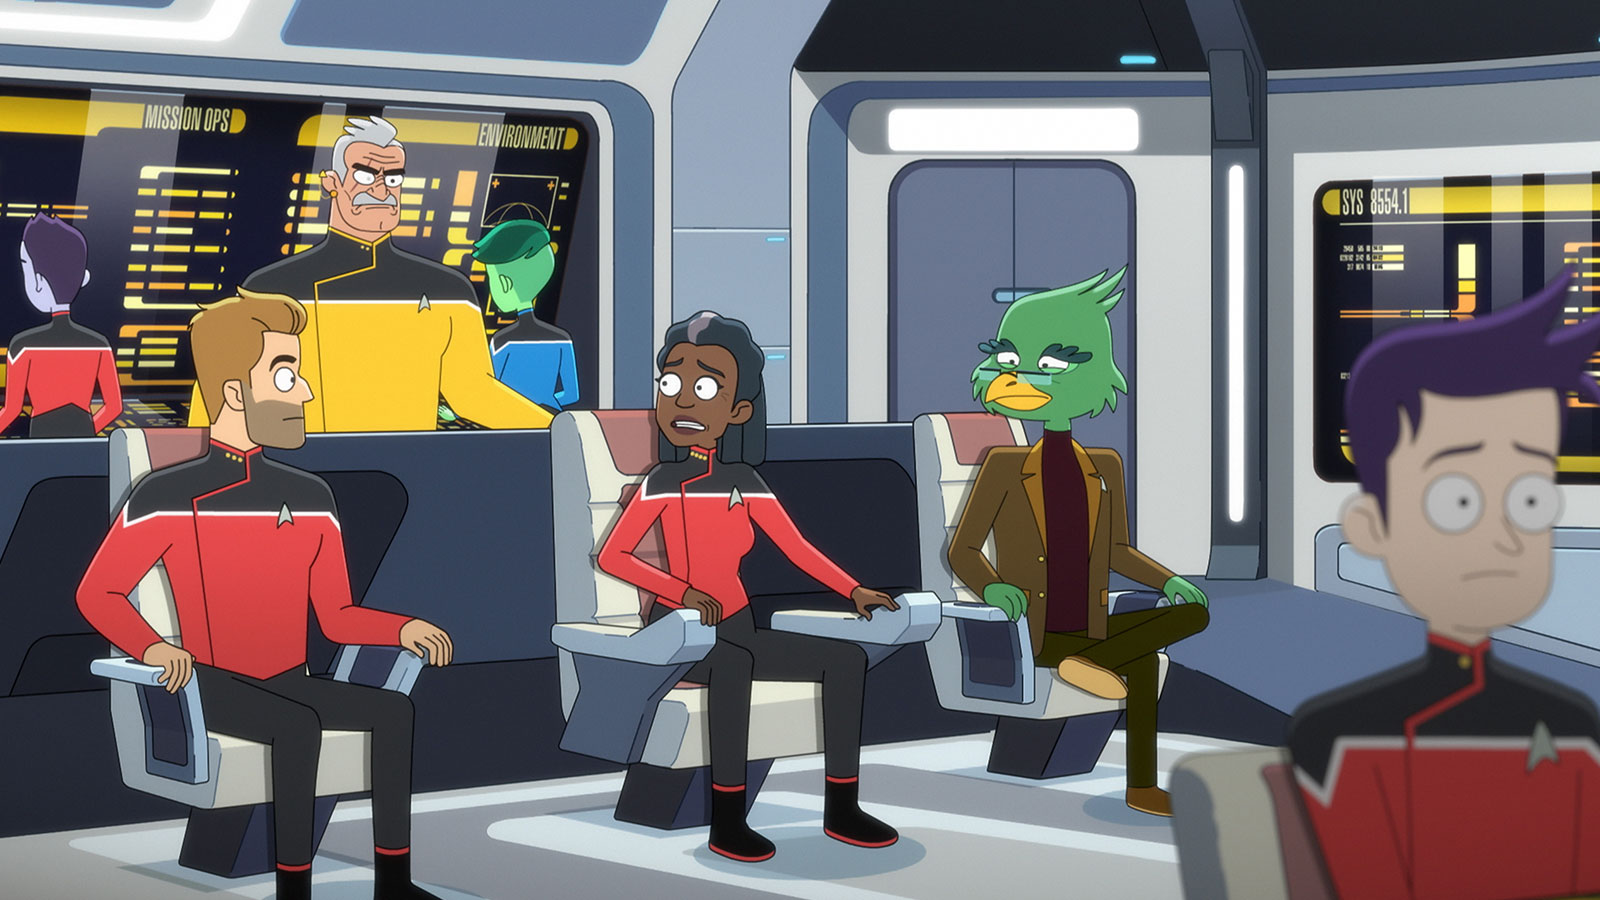 Star Trek: Lower Decks Season 3 Finale "The Stars at Night" New Images + Preview